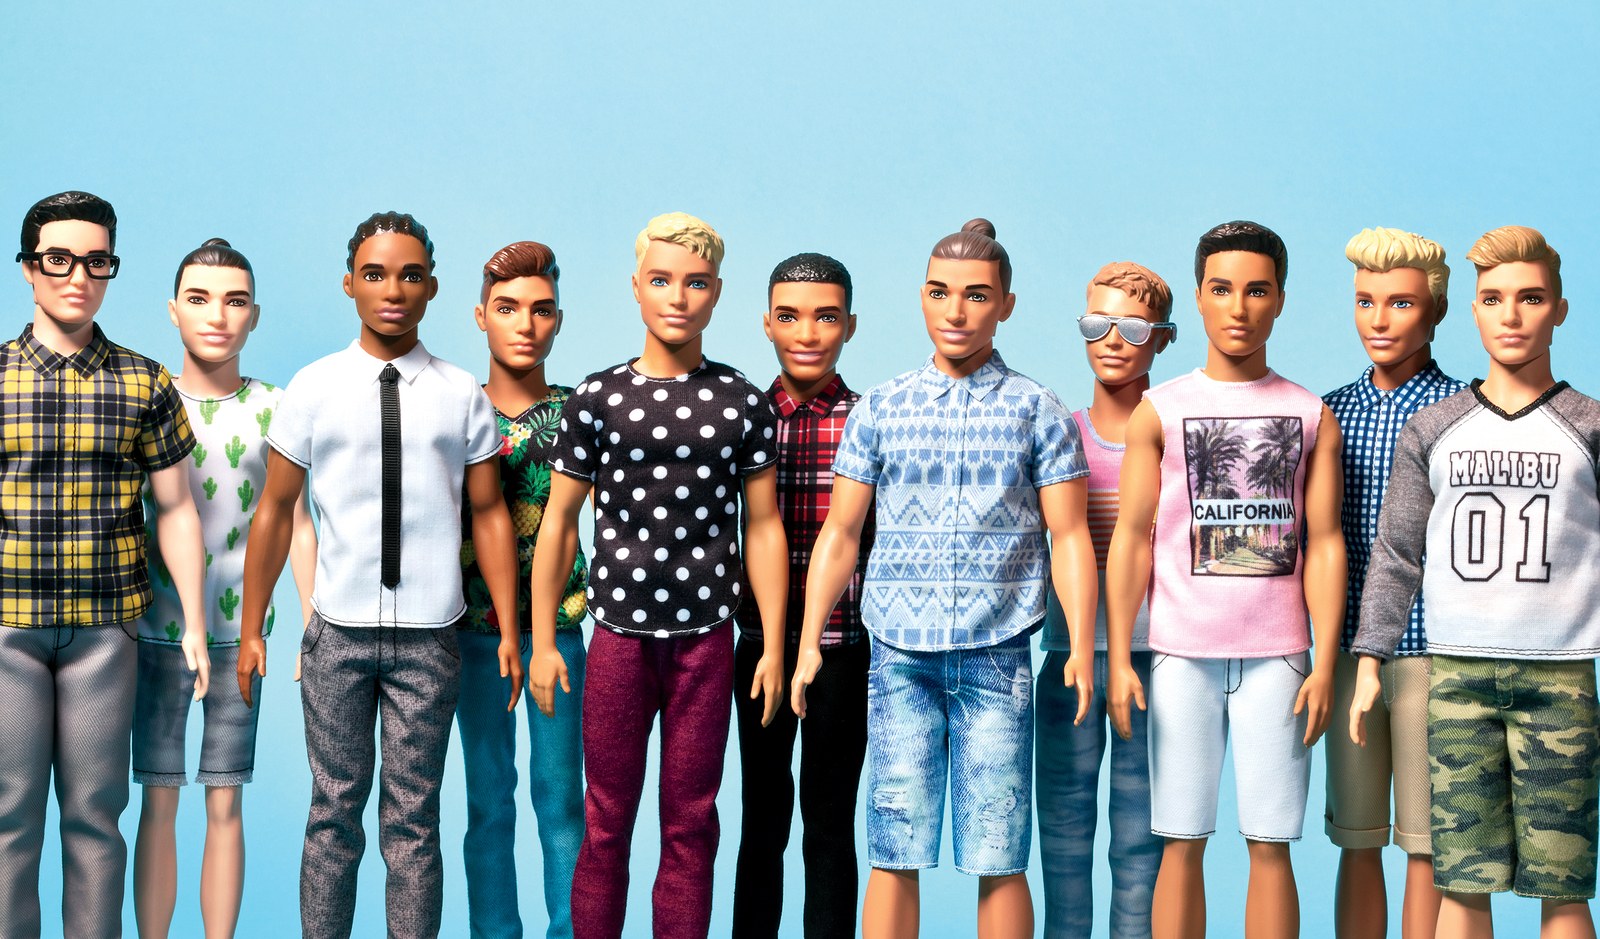 ken dolls of the future. courtesy of gq.